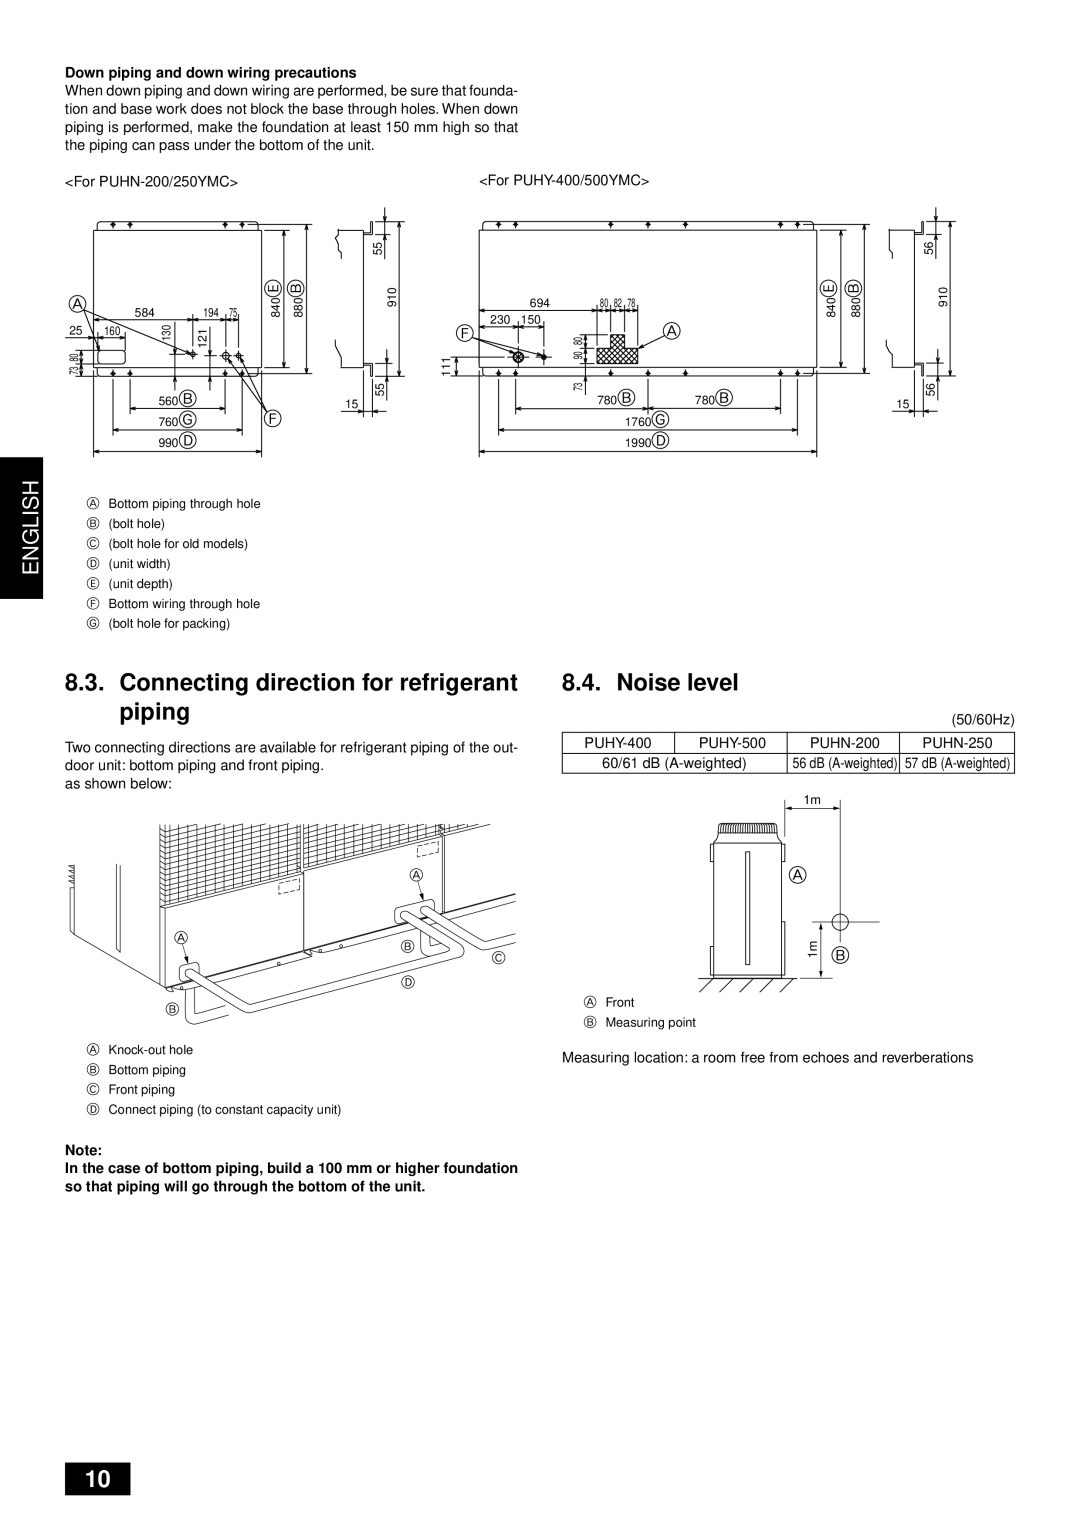 Mitsubishi Electronics PUHY-YMC installation manual Connecting direction for refrigerant piping, Noise level, English 